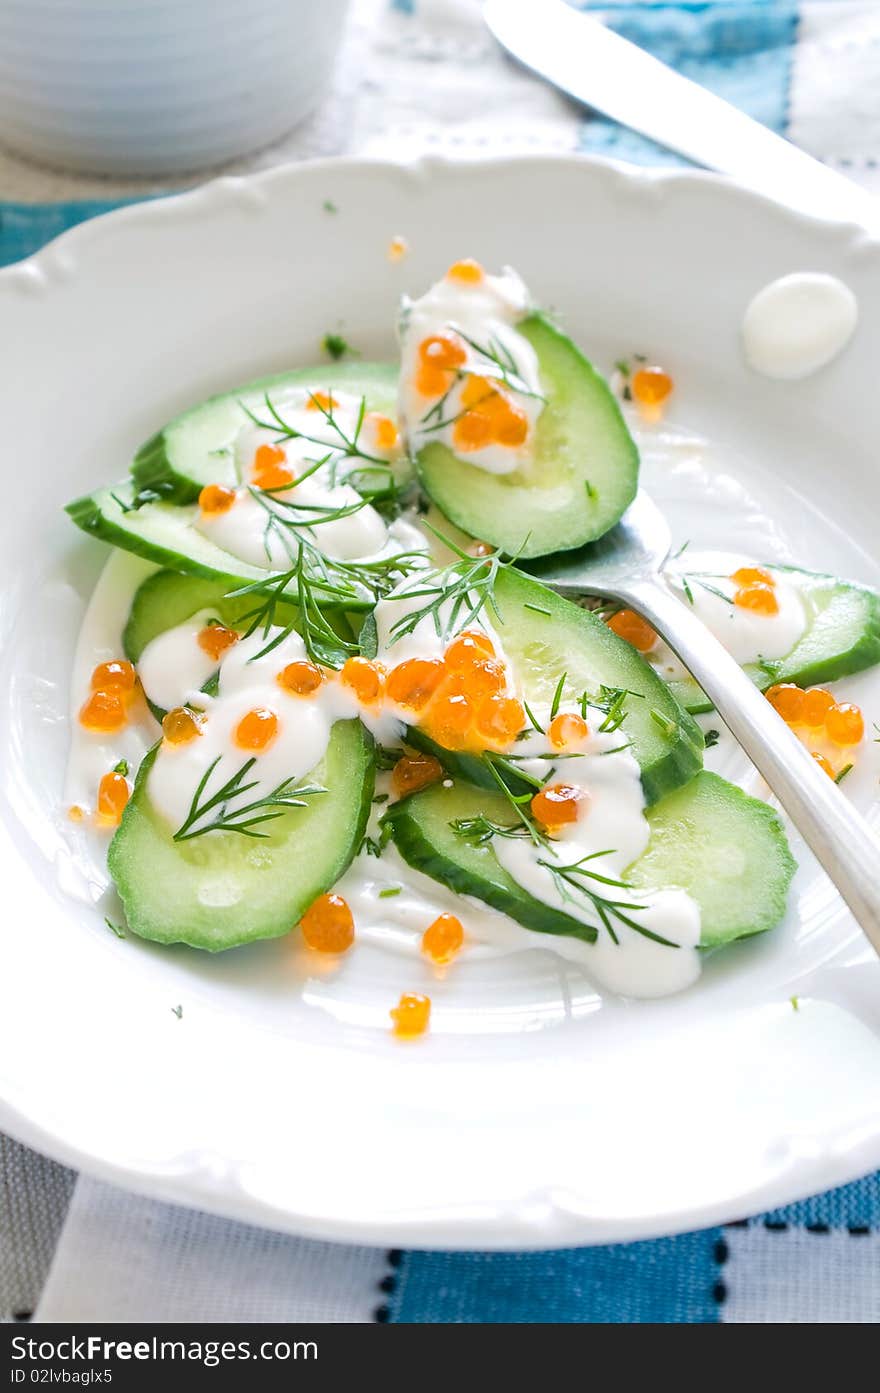 Appetizer from cucumber, caviar and sour cream